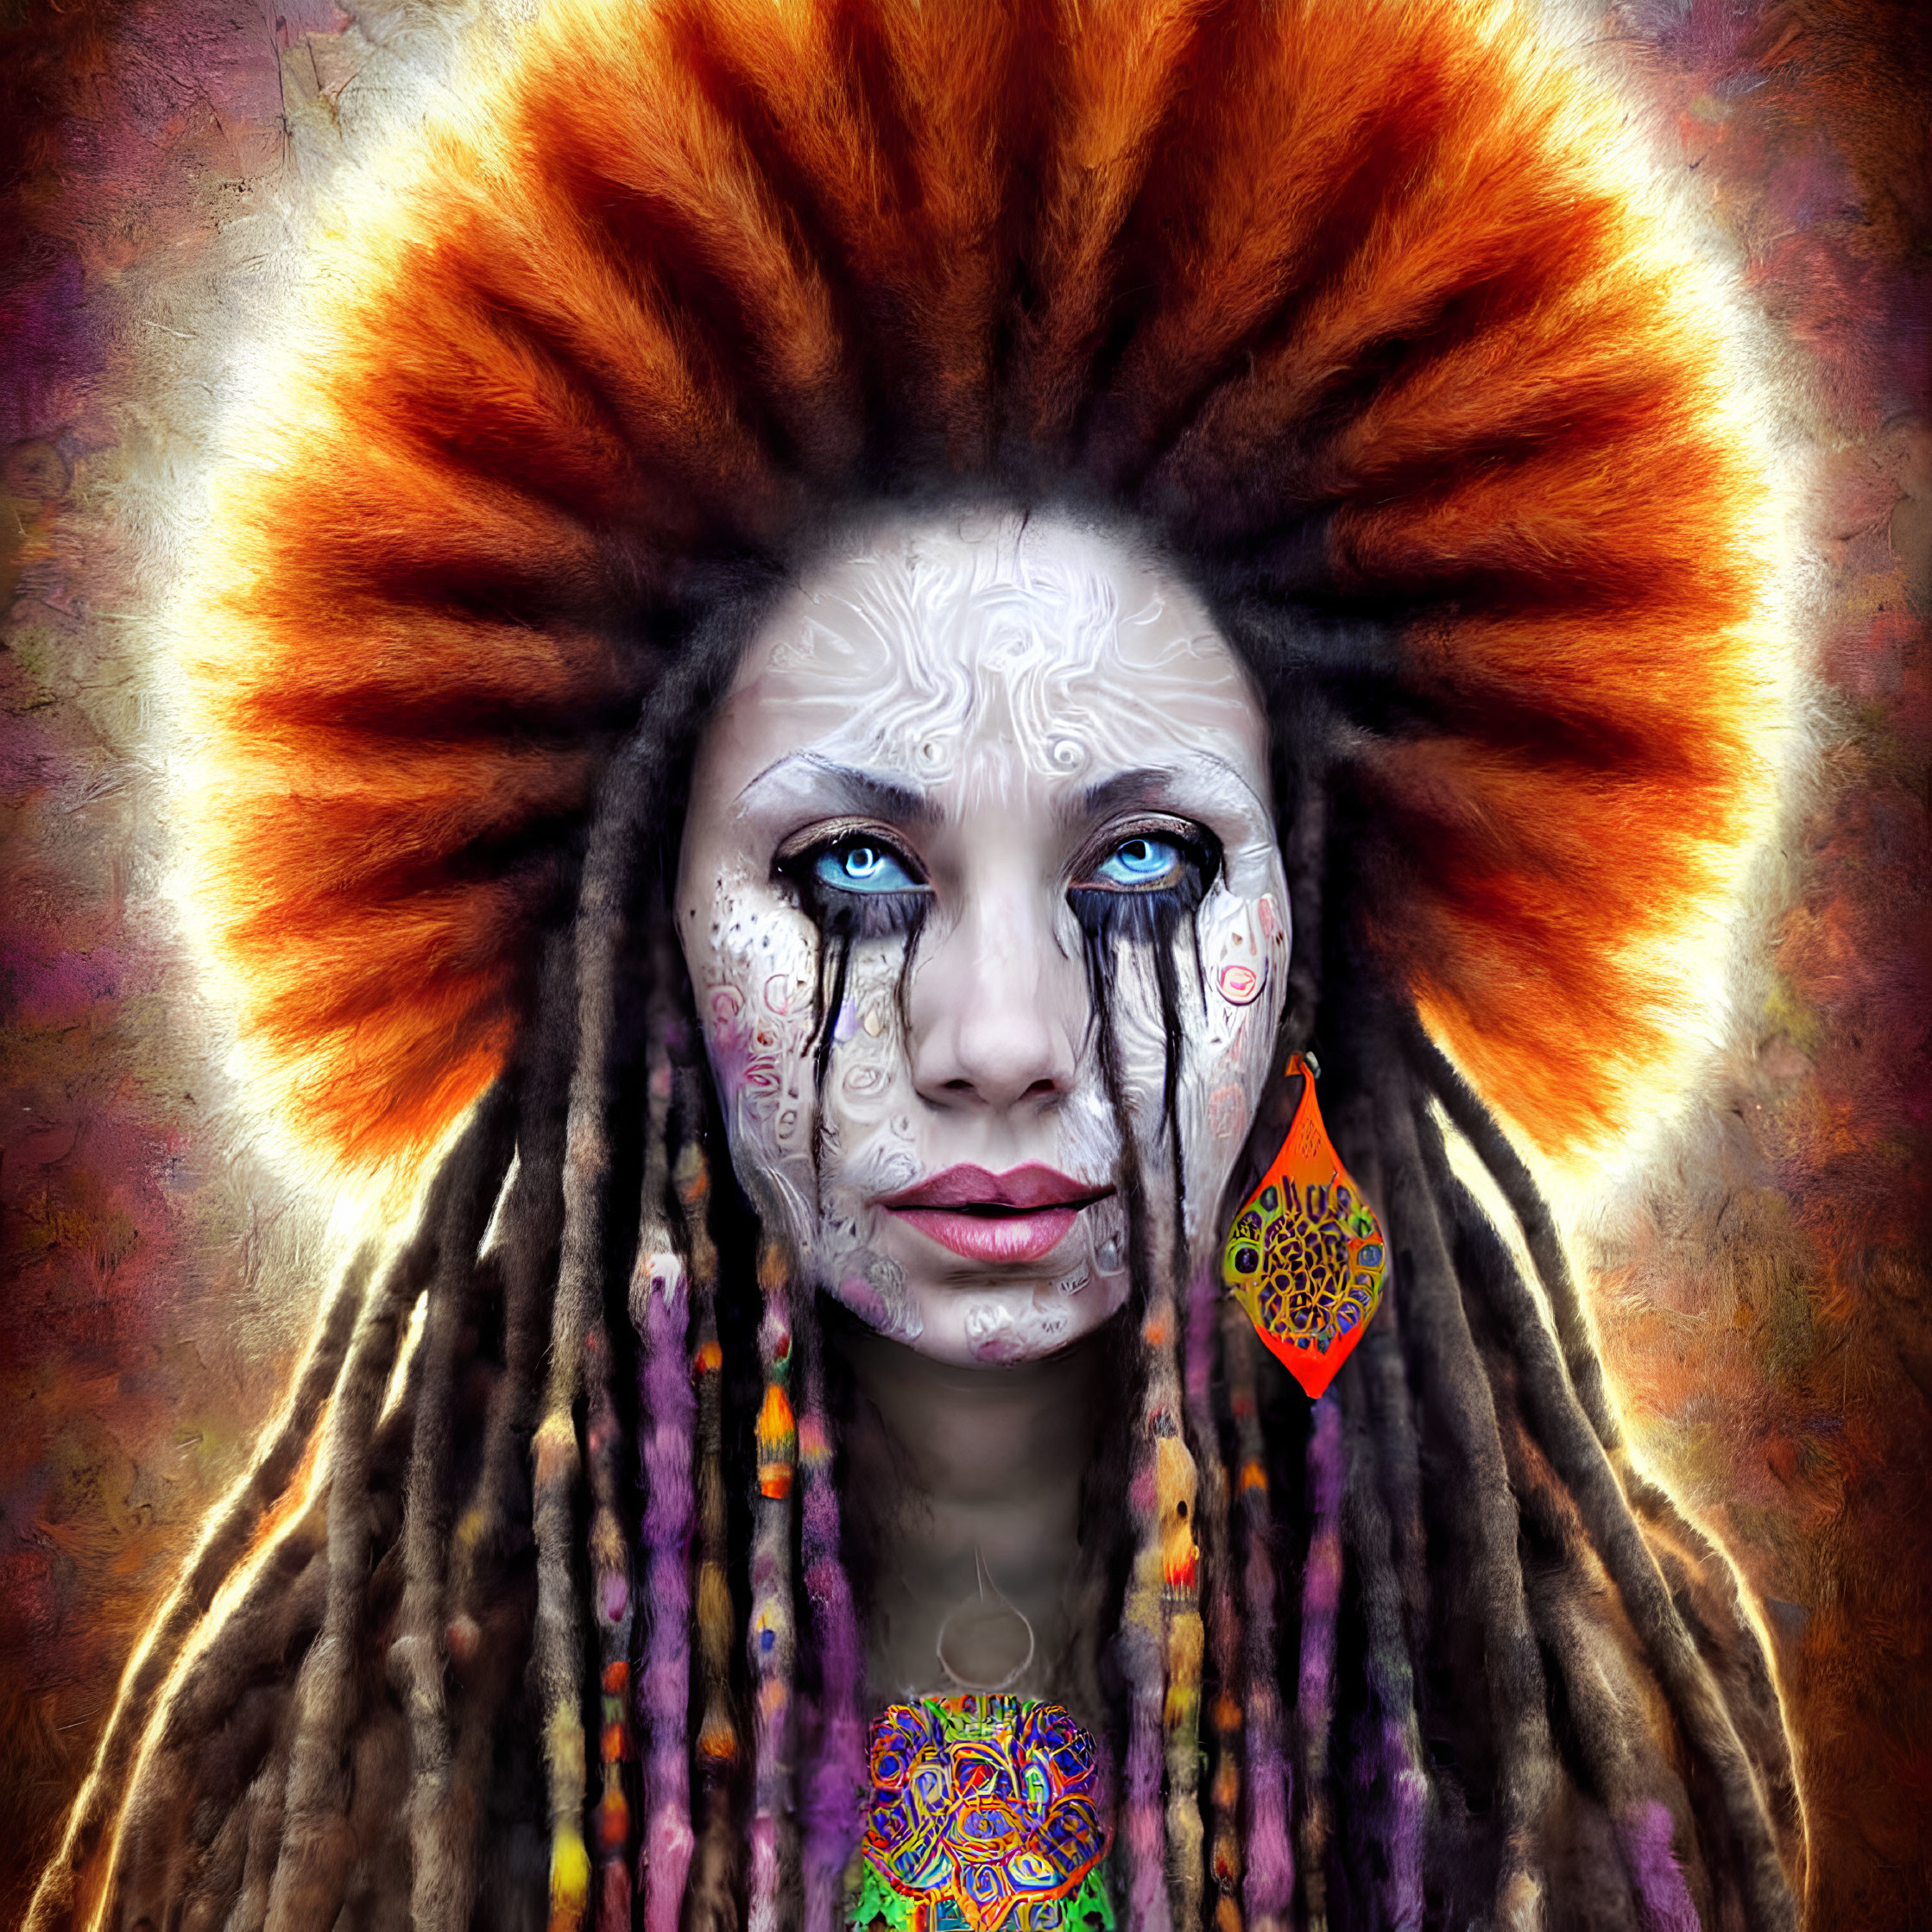 Person with blue eyes, tribal face paint, colorful dreadlocks, and feathered headdress